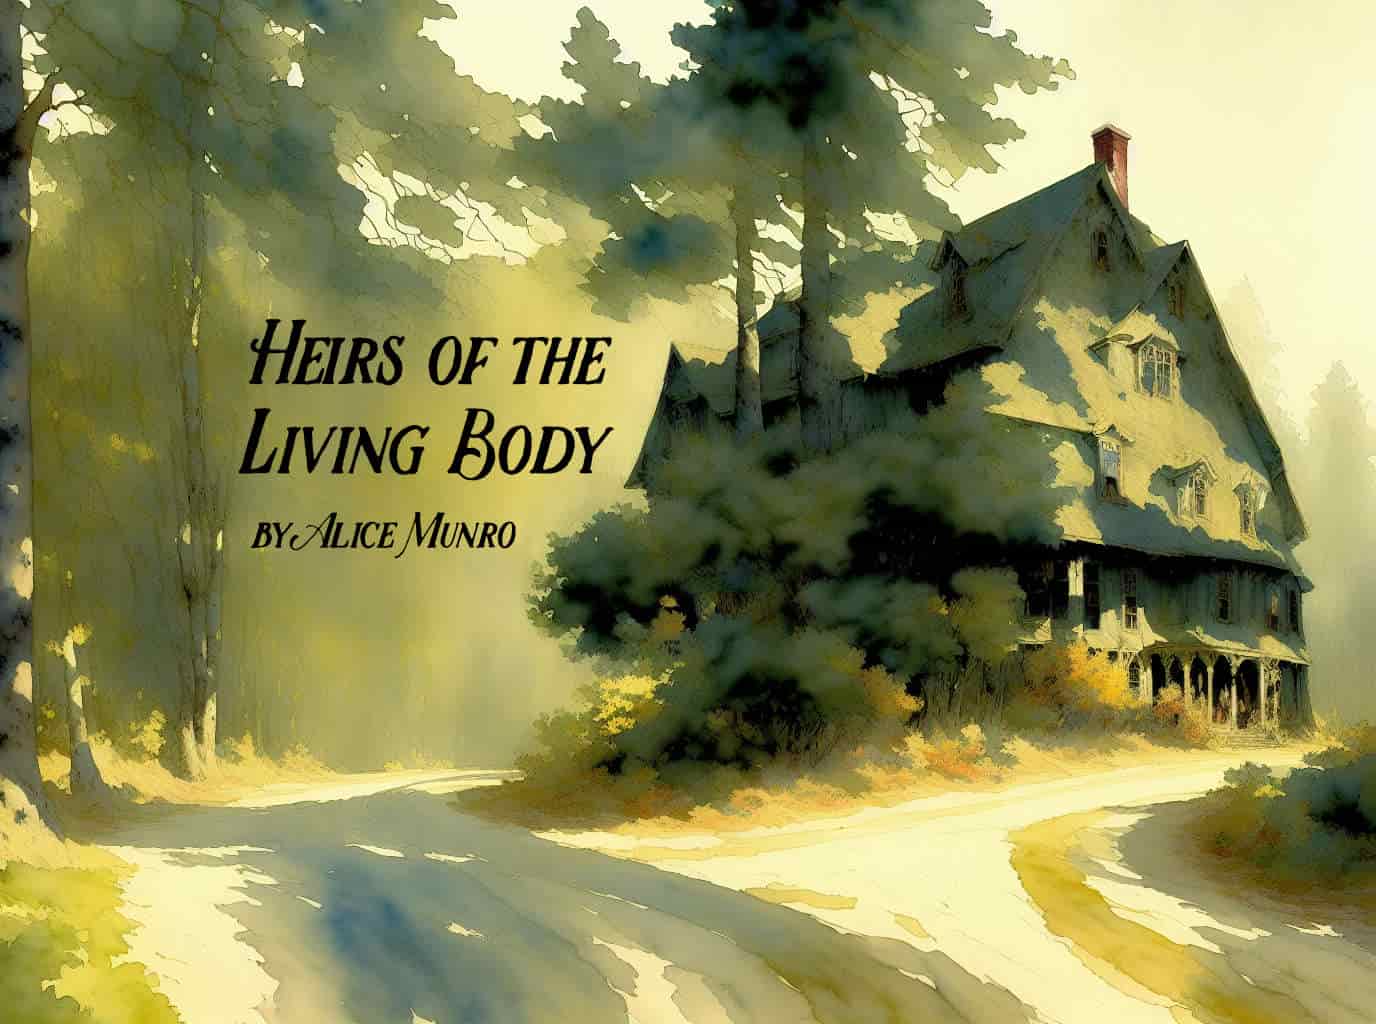 Heirs of the Living Body by Alice Munro Short Story Analysis